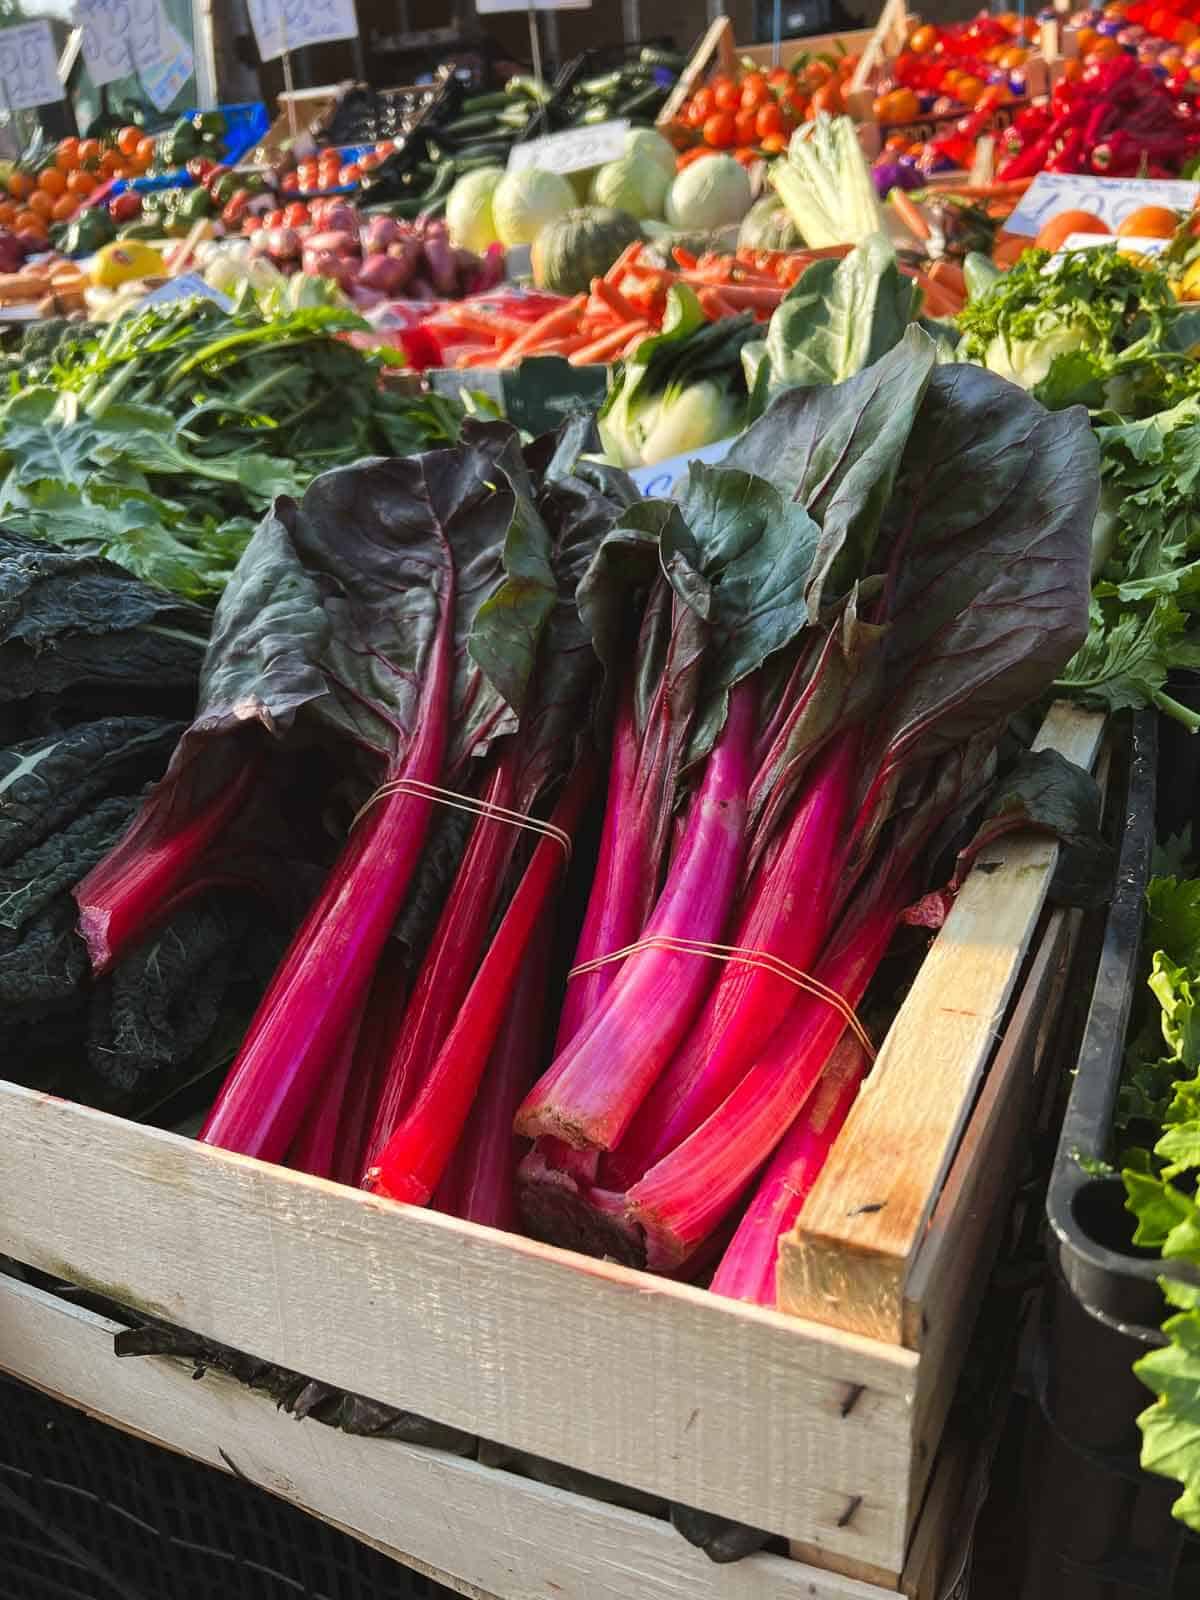 Swiss chard in a box at local market.